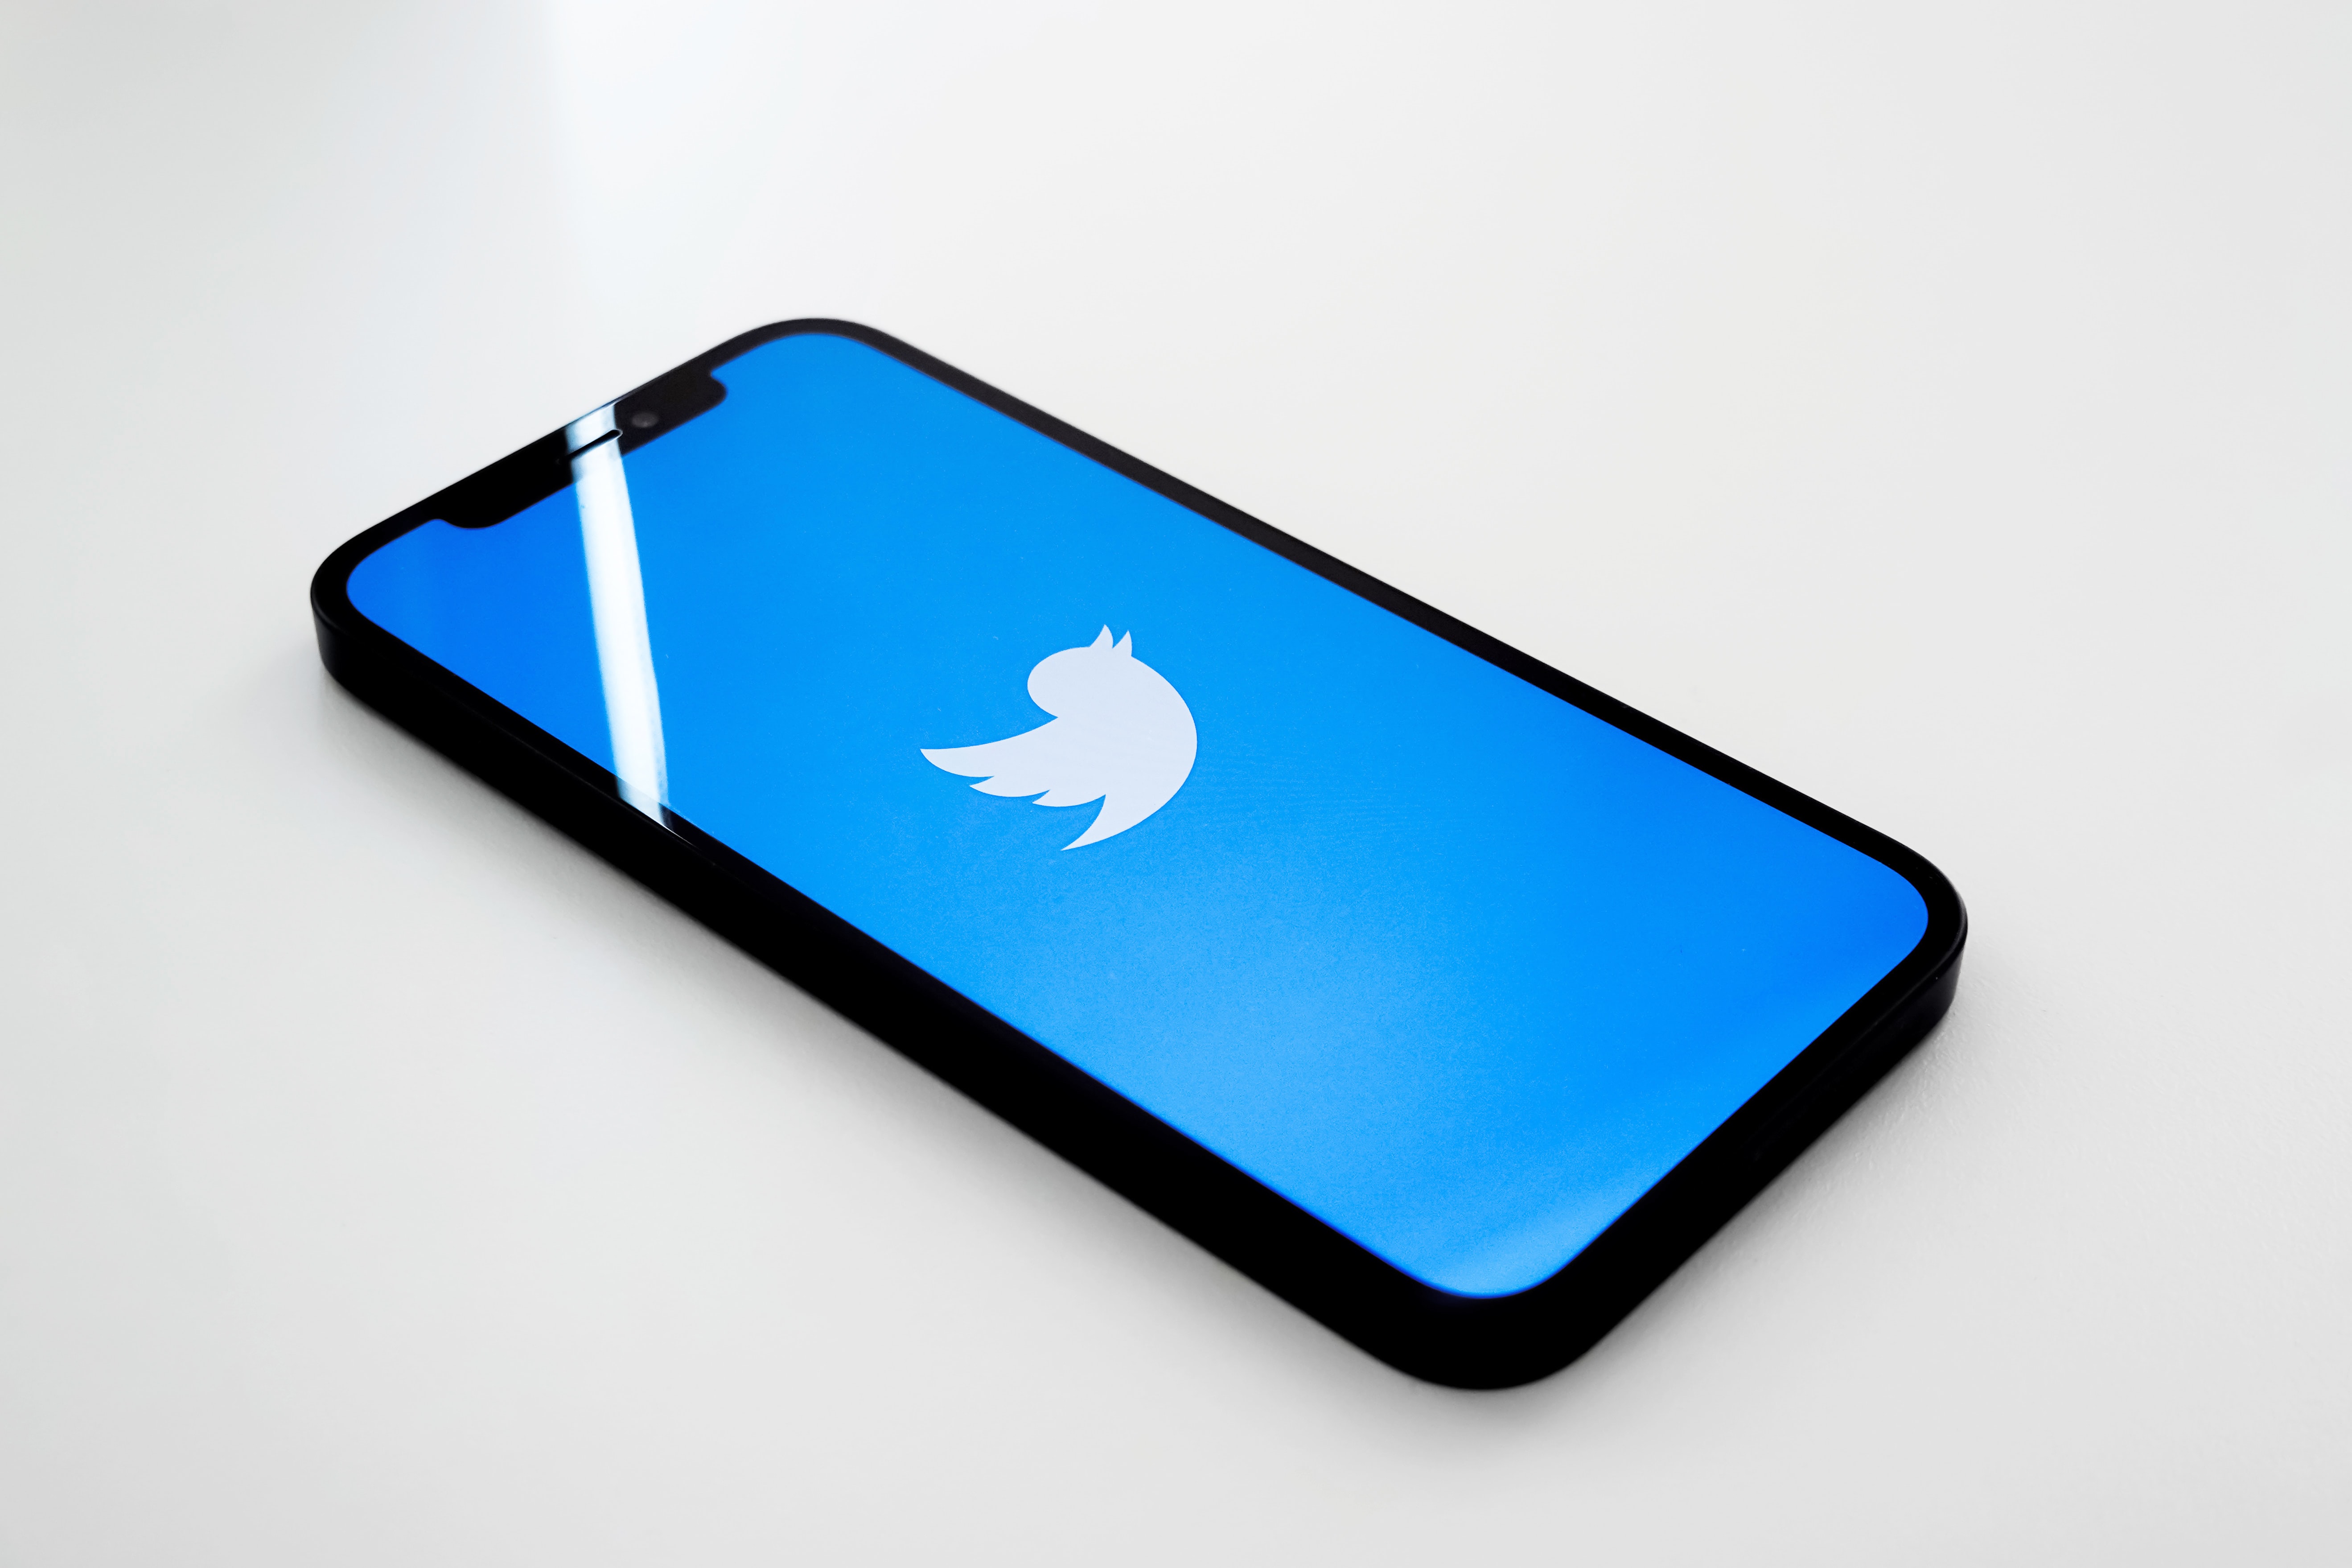 Twitter Edit Button: How to Get Alerted when a Tweet Changes